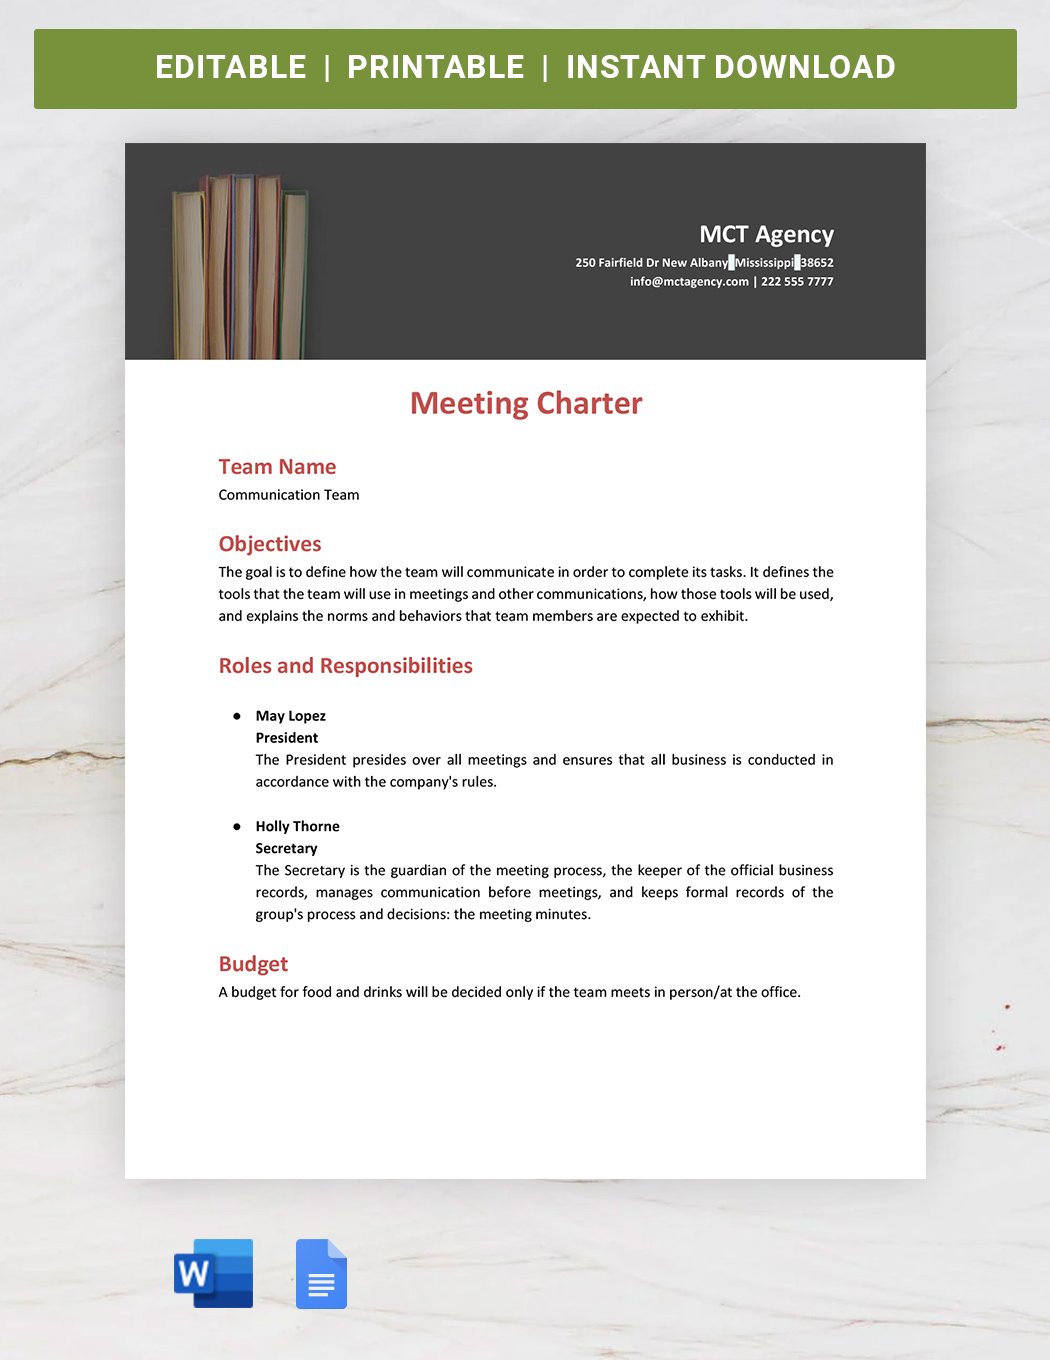 Meeting Charter Template in Word, Google Docs